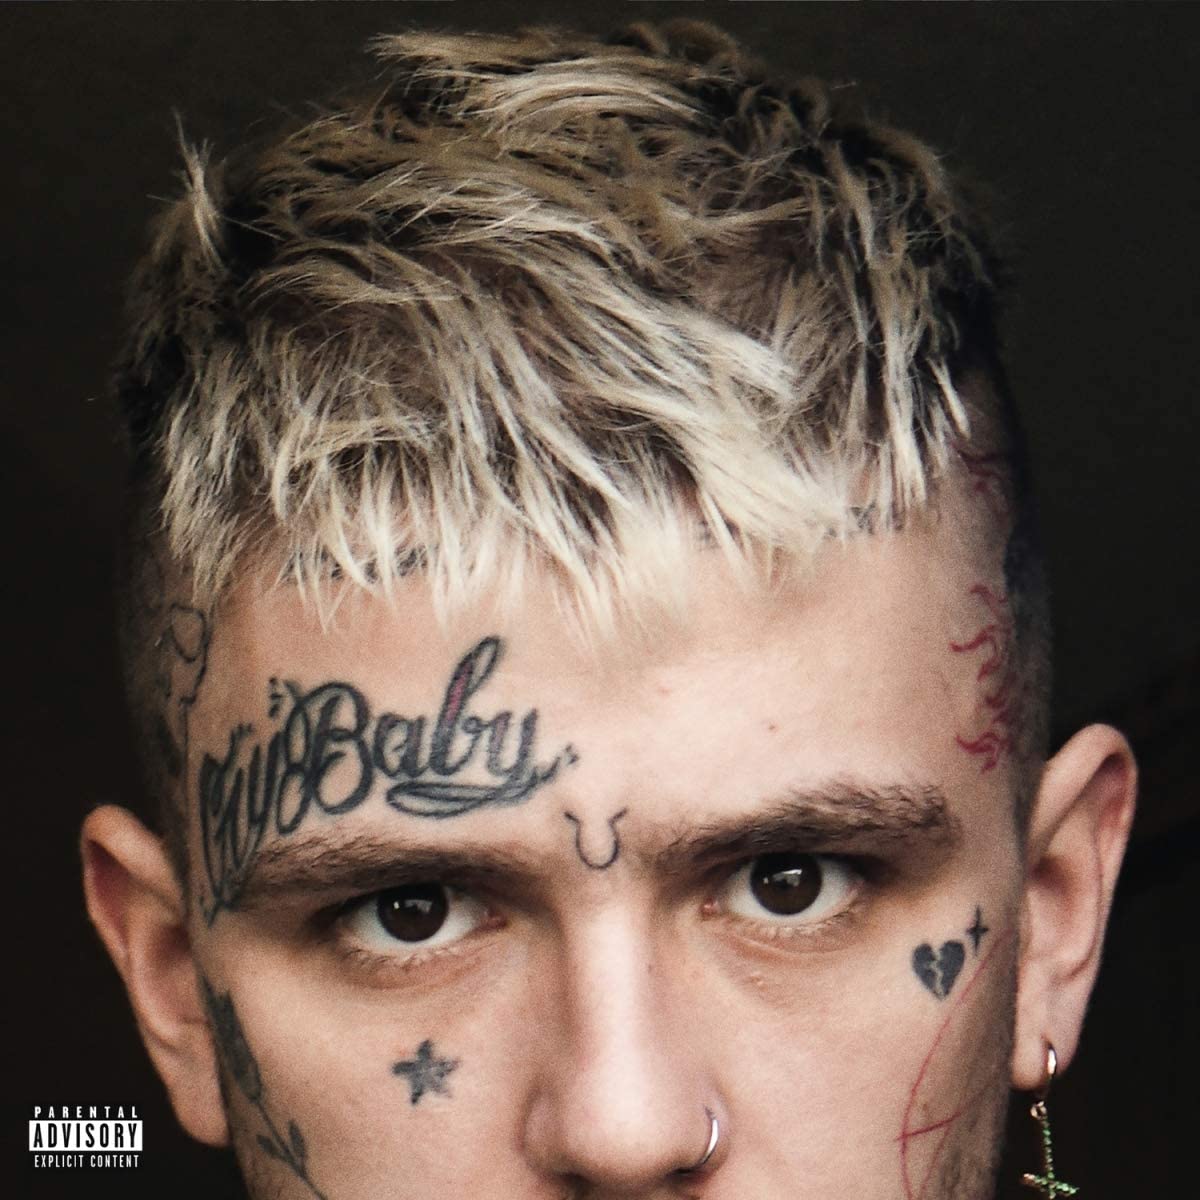 Everybody's Everything is the first compilation album on Vinyl by Lil Peep. It was released on November 15, 2019, by Columbia Records, exactly two years after his death.